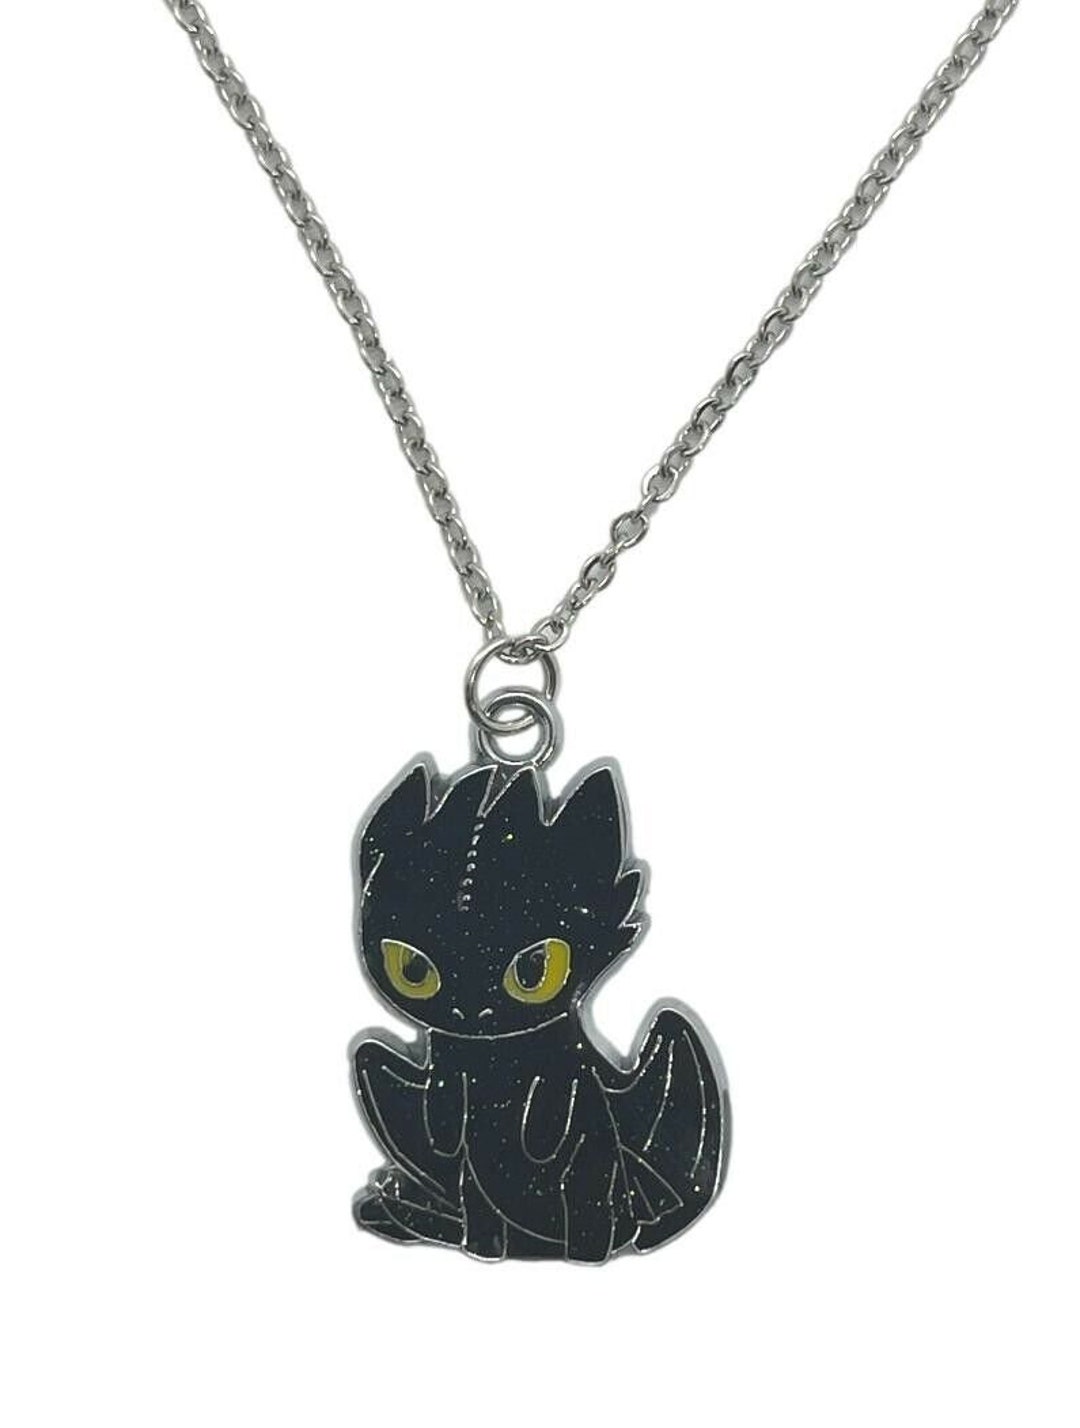 How to Train Cartoon Dragon Toothless Character Necklace - Etsy